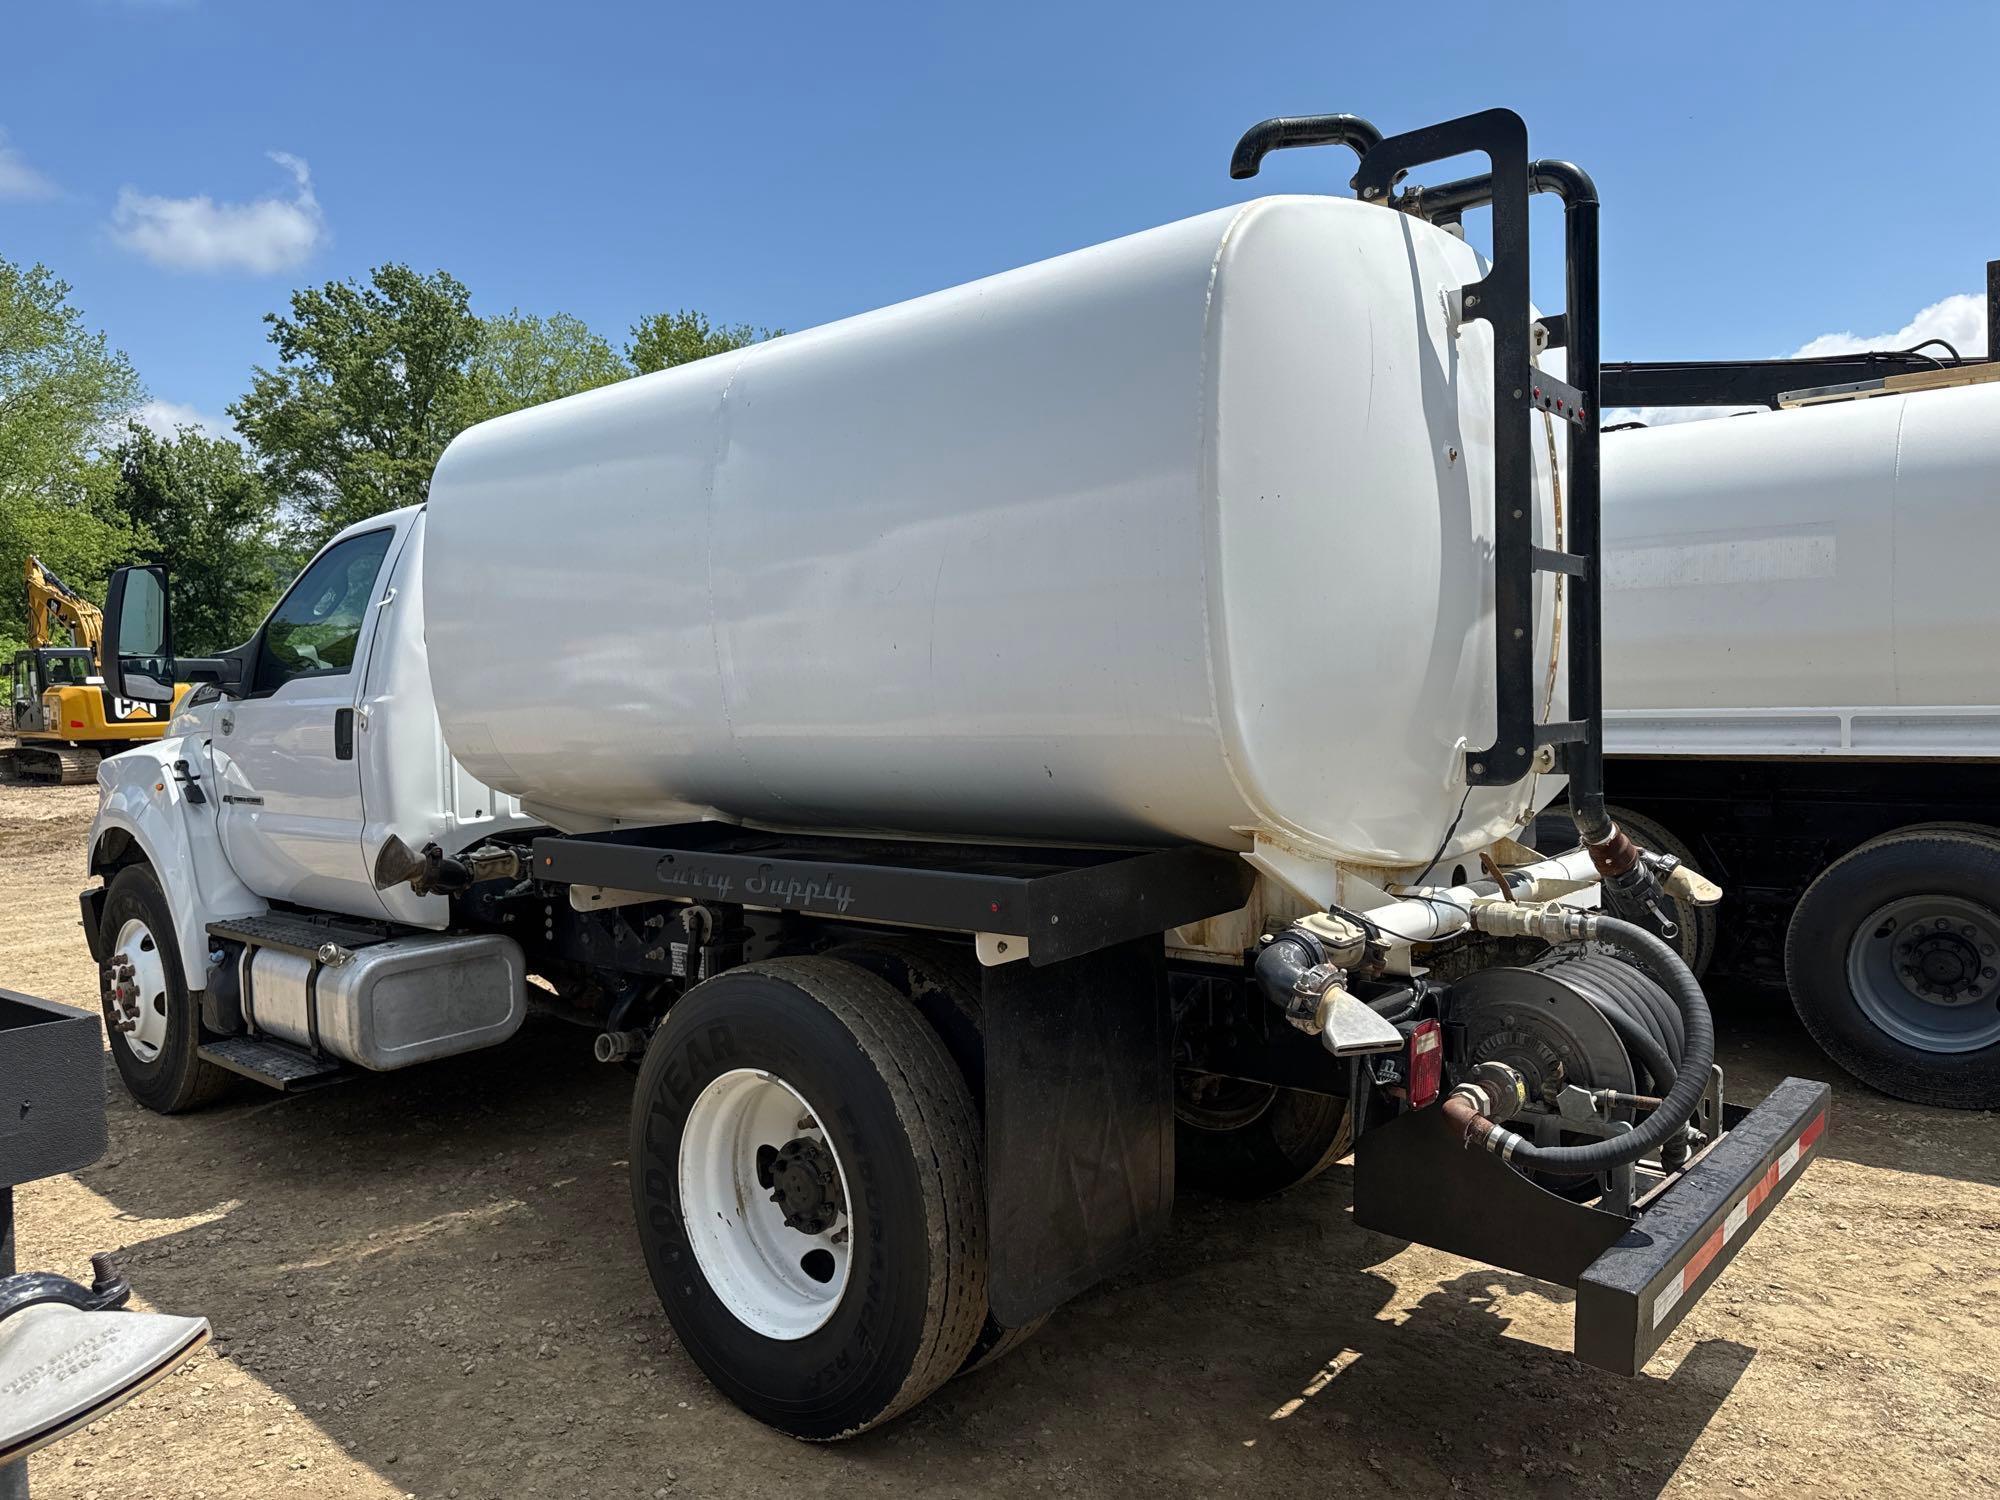 2018 FORD F750 WATER TRUCK VN:DF05252 powered by 6.7L diesel engine, equipped with automatic